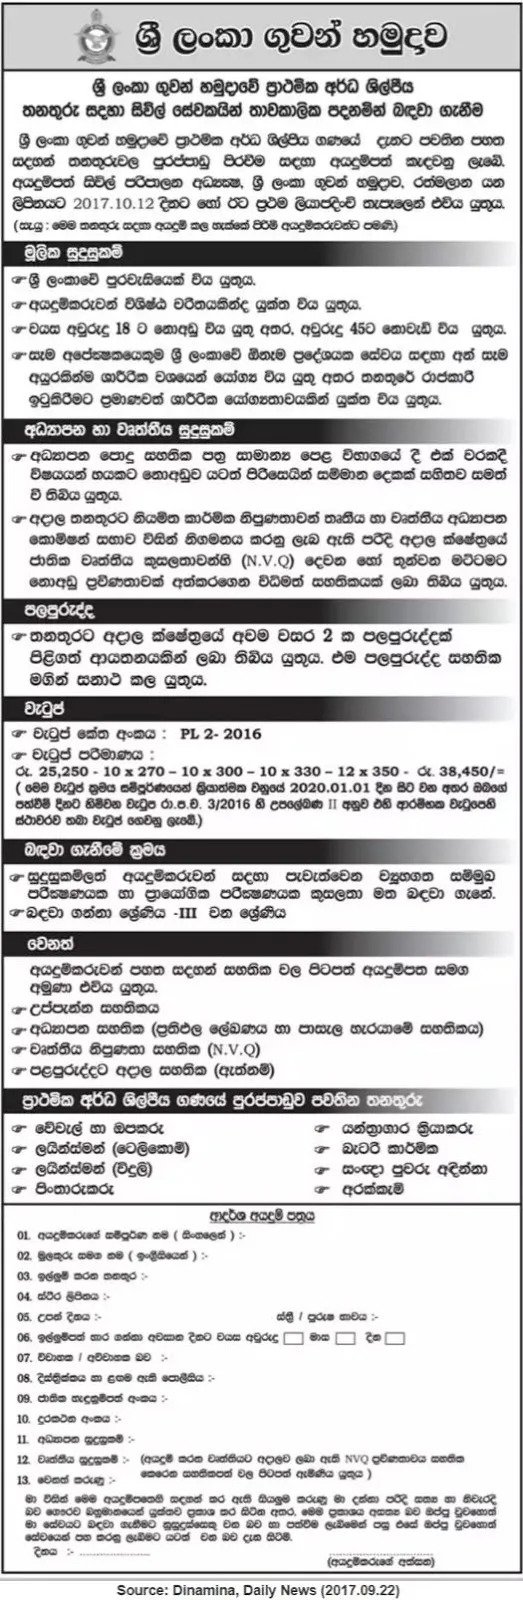 Civil Employees for Primary Semi Skilled Posts - Sri Lanka Air Force